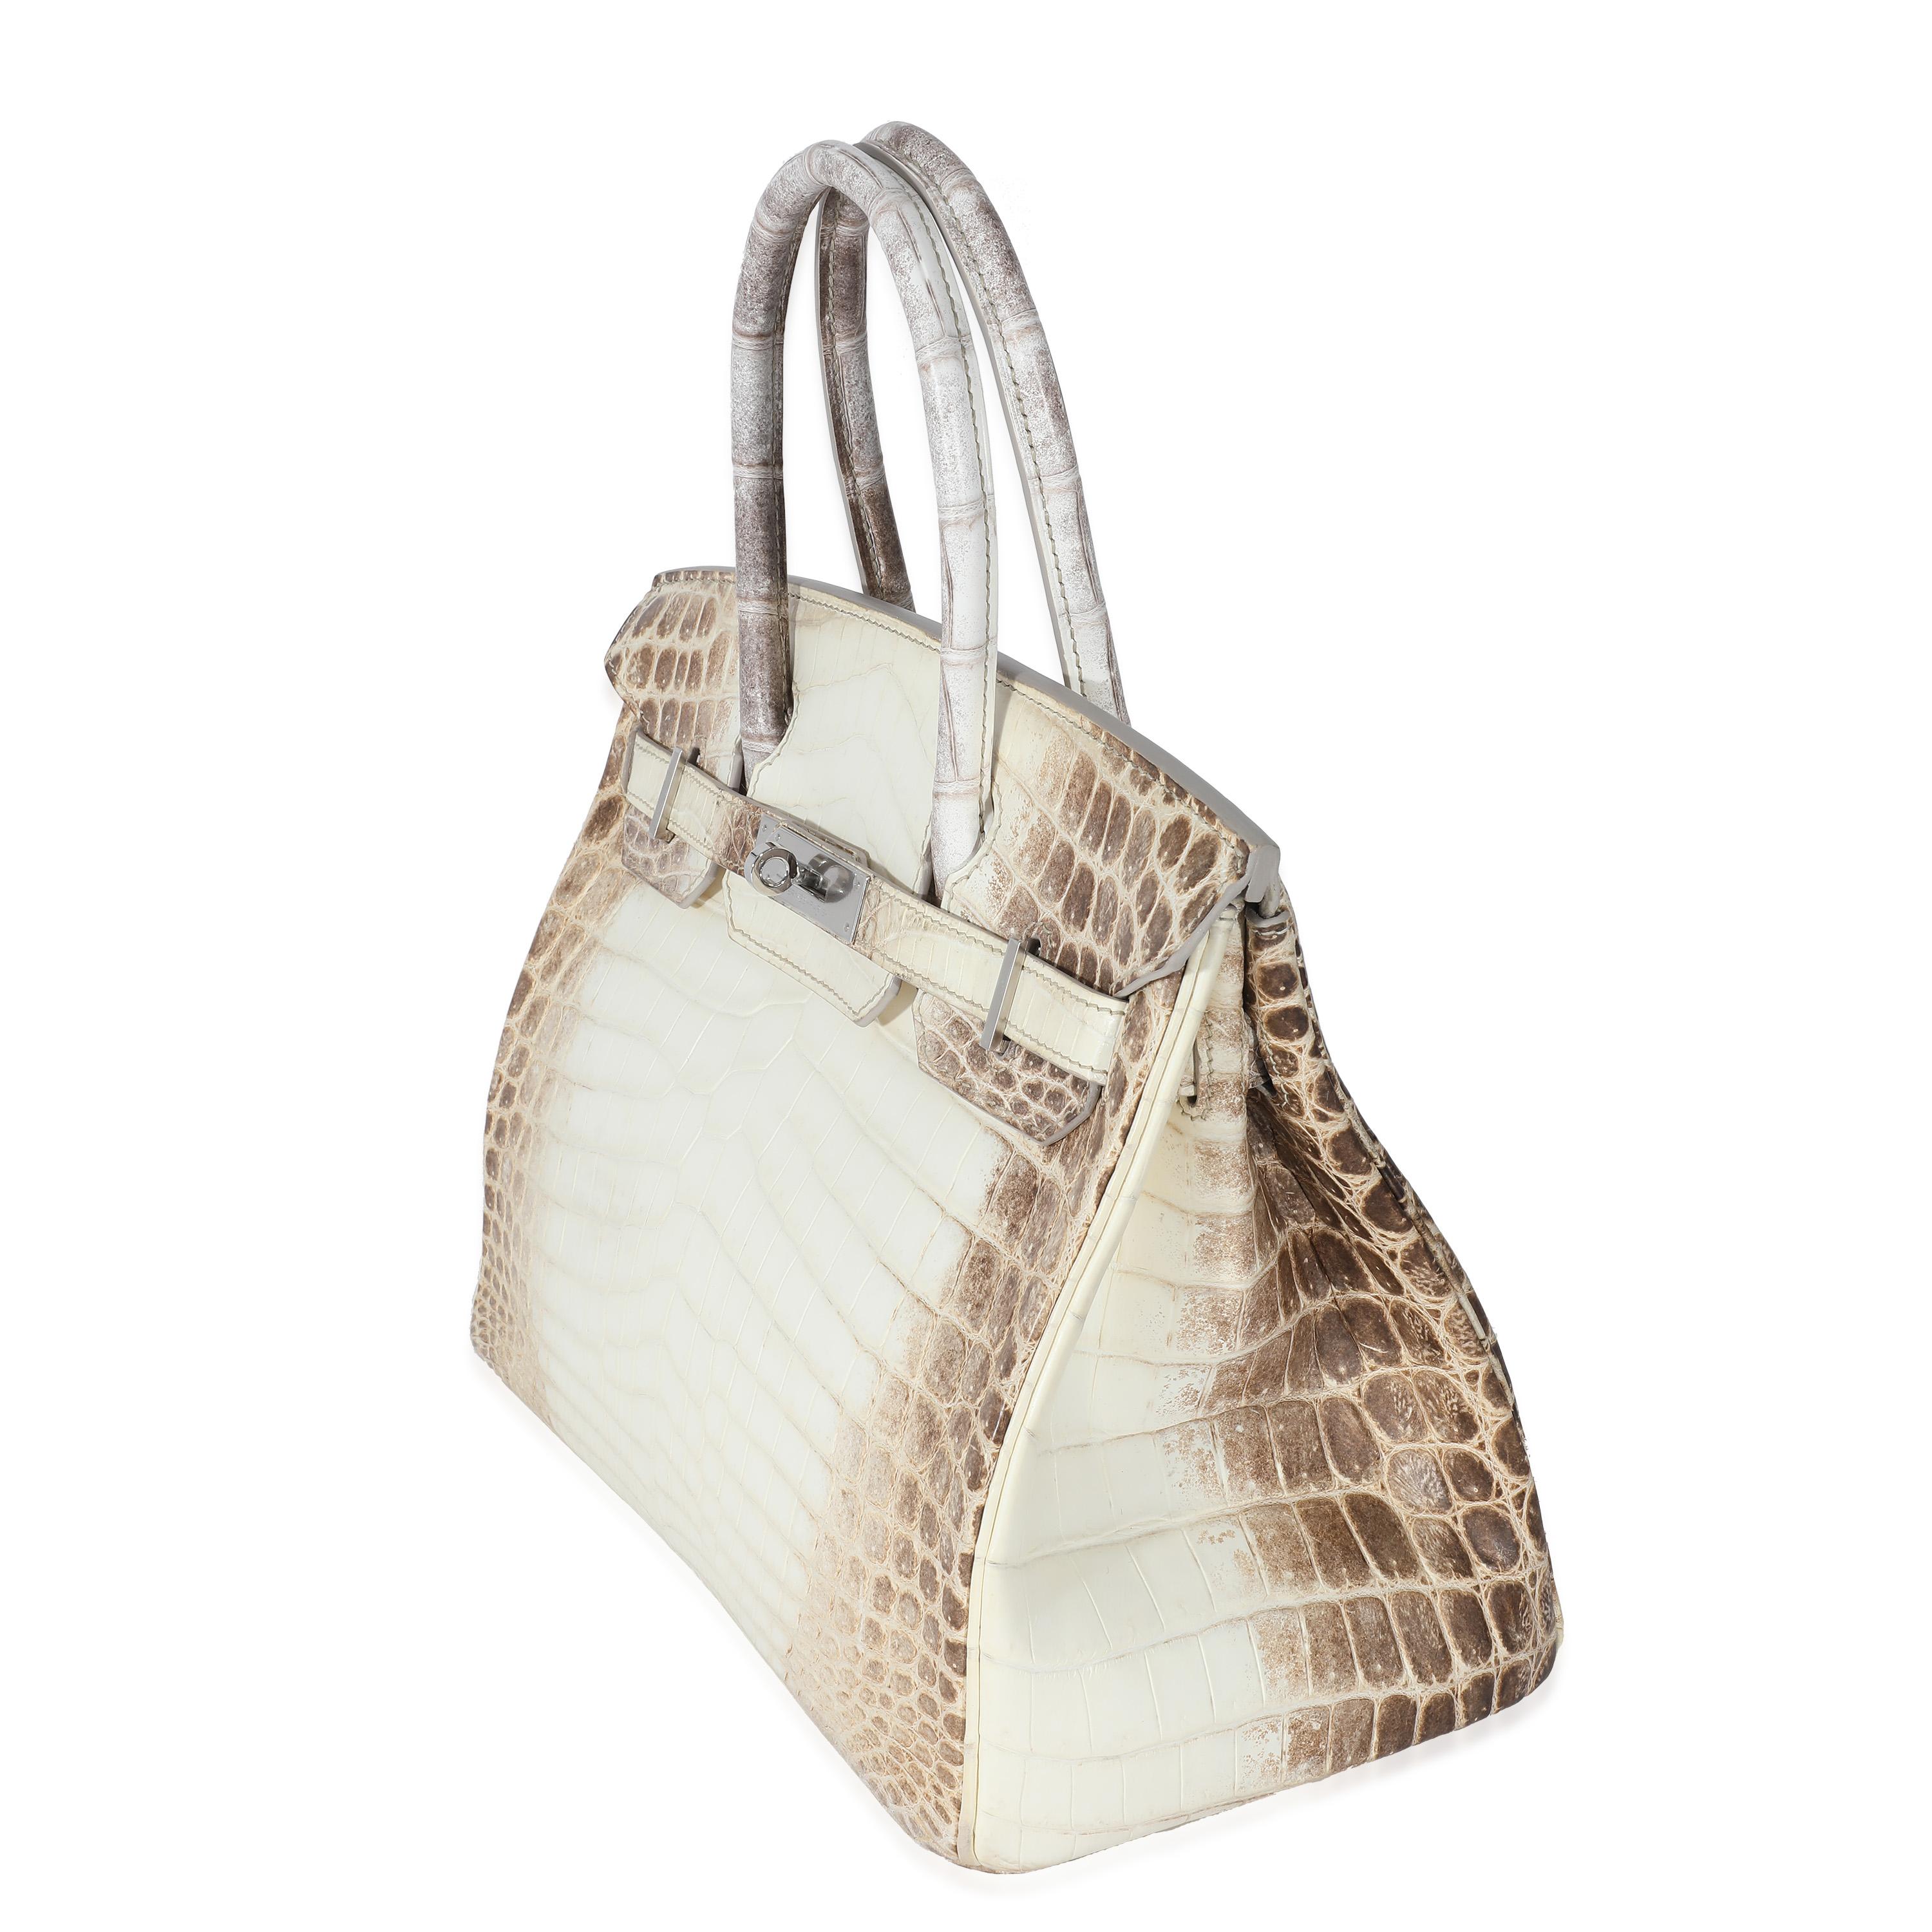 Hermès Rare Matte White Himalaya Niloticus Crocodile Birkin 30 PHW
SKU: 112574

Condition Comments: Item is in excellent condition and displays light signs of wear. Plastic present along hardware. Faint marks along interior and exterior